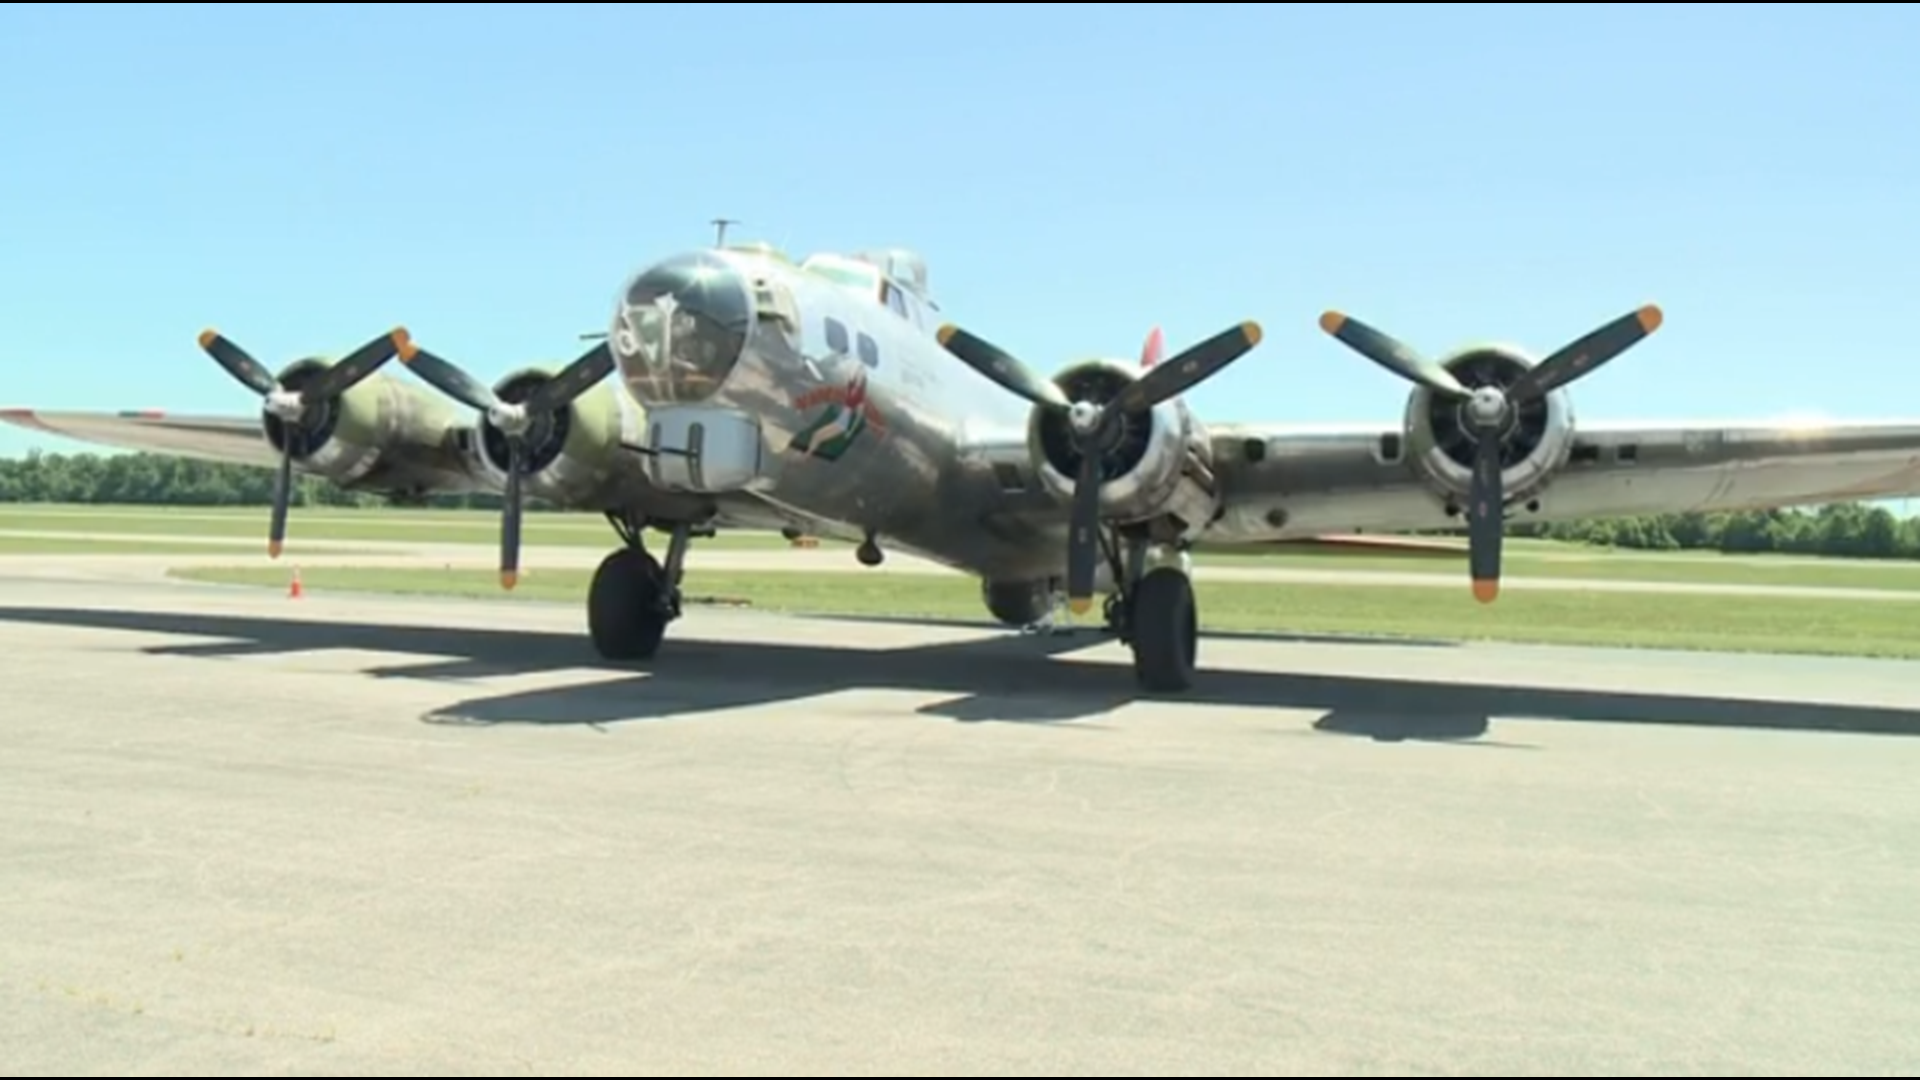 WWII veteran returns to the skies in a B-17 Bomber